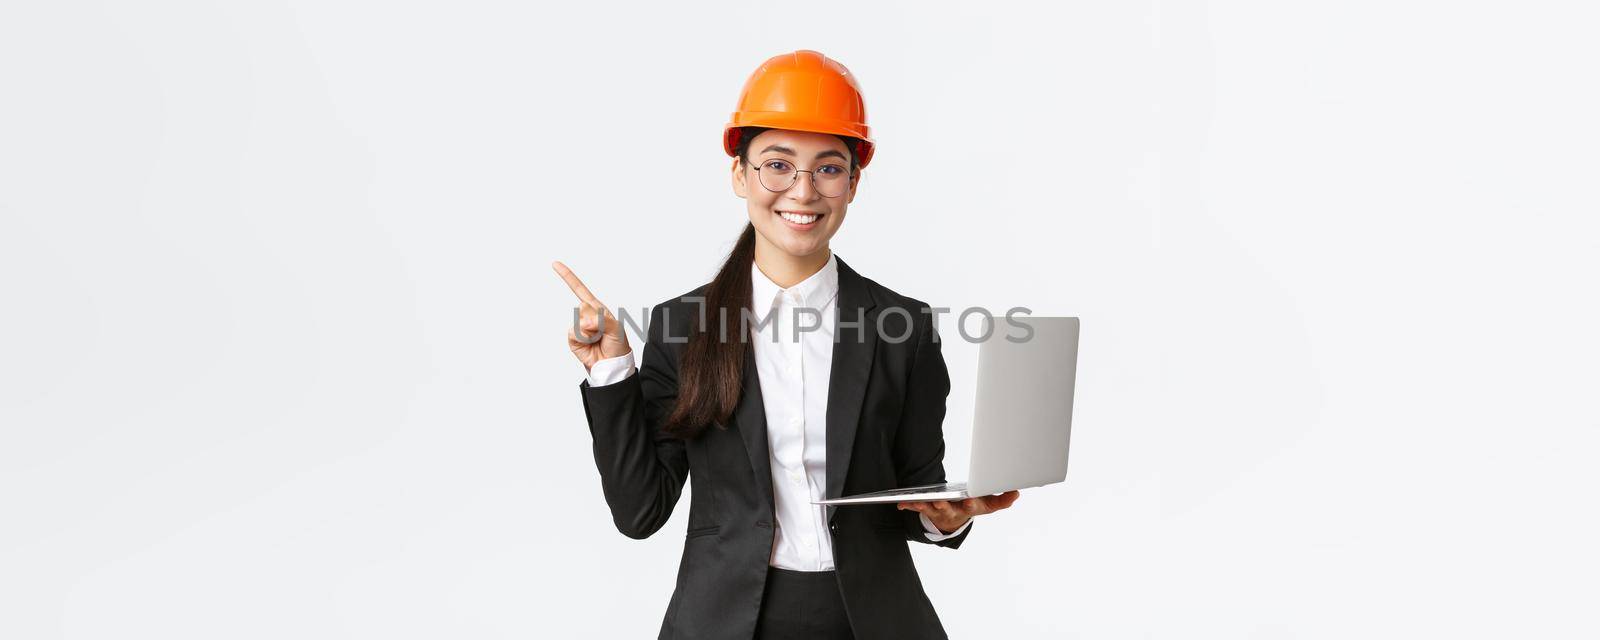 Smiling professional asian female engineer or architect at construction, wearing safety helmet and suit, pointing finger left while using laptop computer, standing white background.